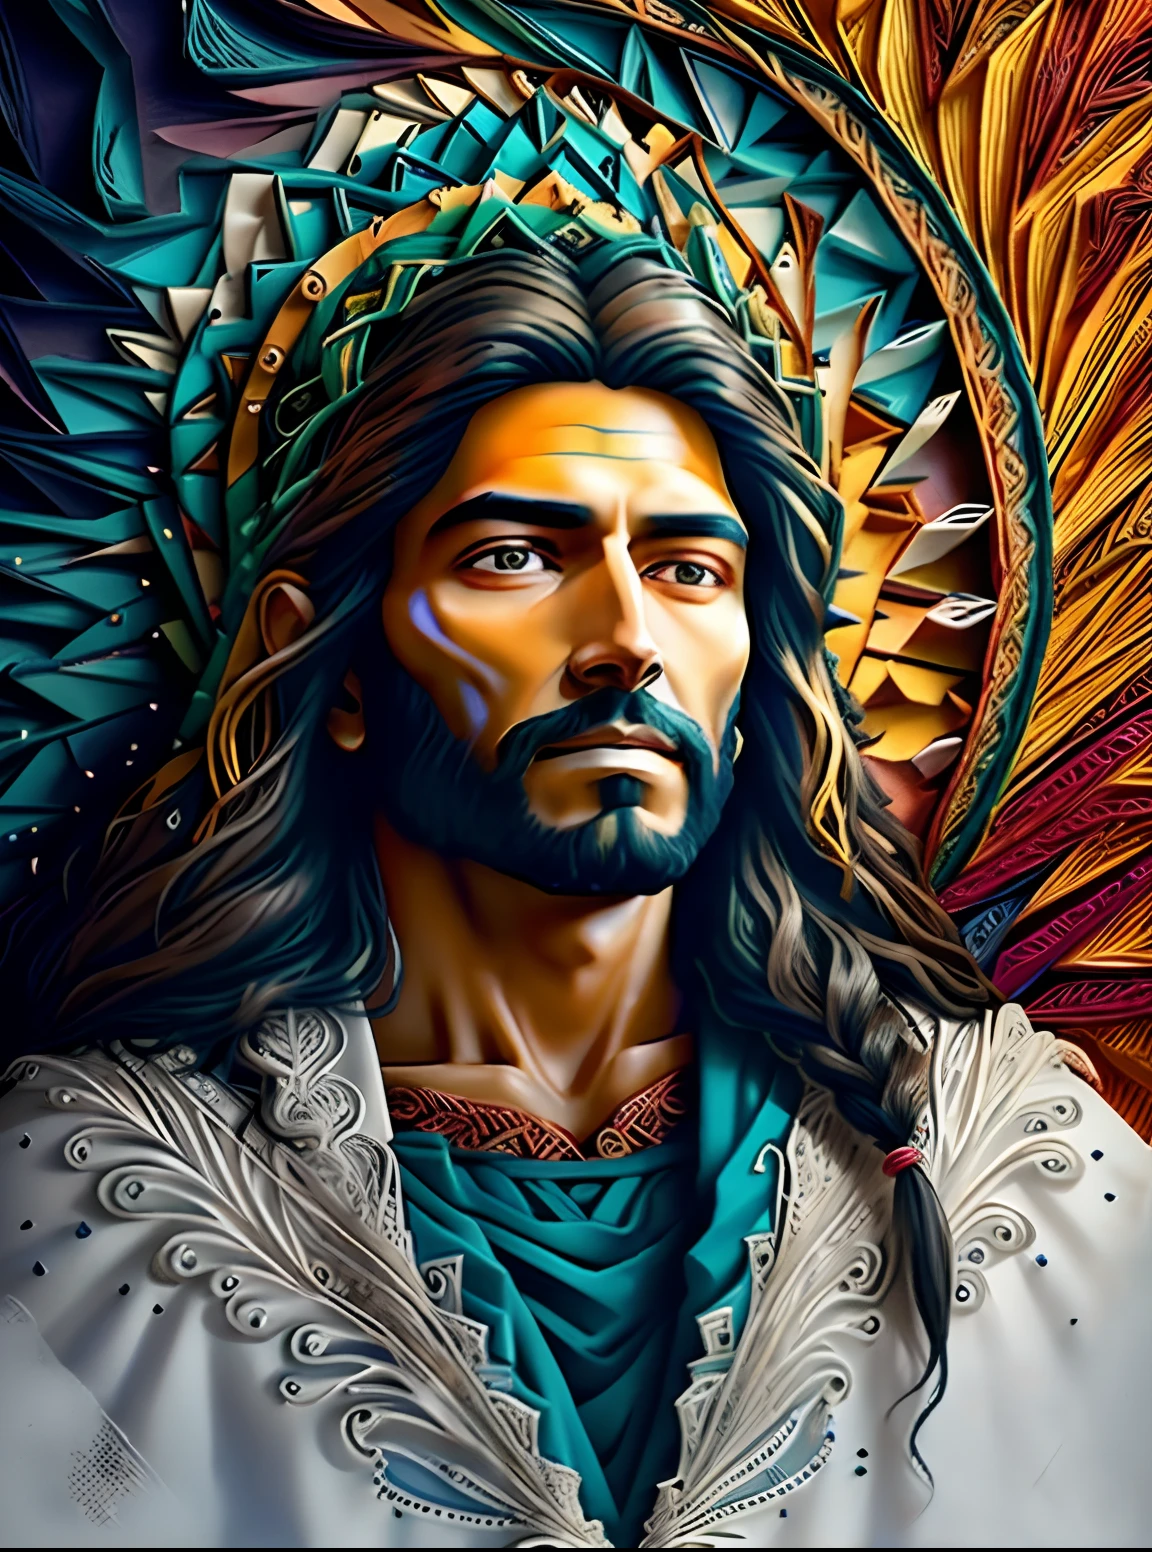 psychedelic art A portrait of イエス Christ with a cheerful and welcoming facial expression, 多次元クイリング紙, 多次元幾何学壁ポートレート, アヤワスカアート, 美しい, 着色, 主な作品, より良い品質, より良い品質, 公式アート, 美しく、審美的,((8K超リアル)) イエスは世の光であられる, (((イエス Cristo))), イエス, Tron legado イエス Cristo, rosto de イエス, ナザレのイエス, 主であり救い主, Tron legado イエス, イエス Cristo.